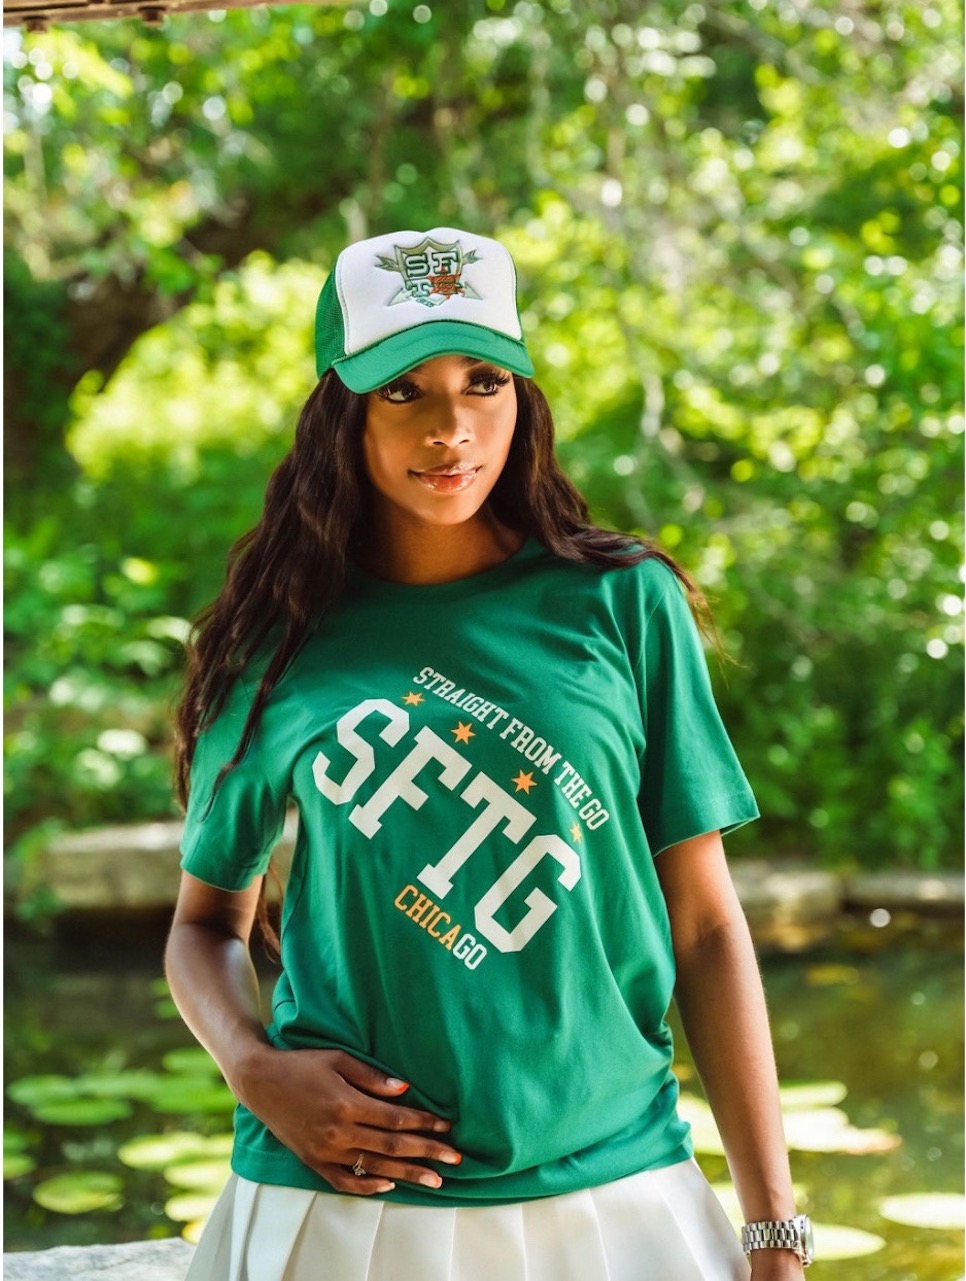 Raven smith standing wearing a white and green trucker hat with the SFTG shield Logo, with a hunter green SFTG t-shirt